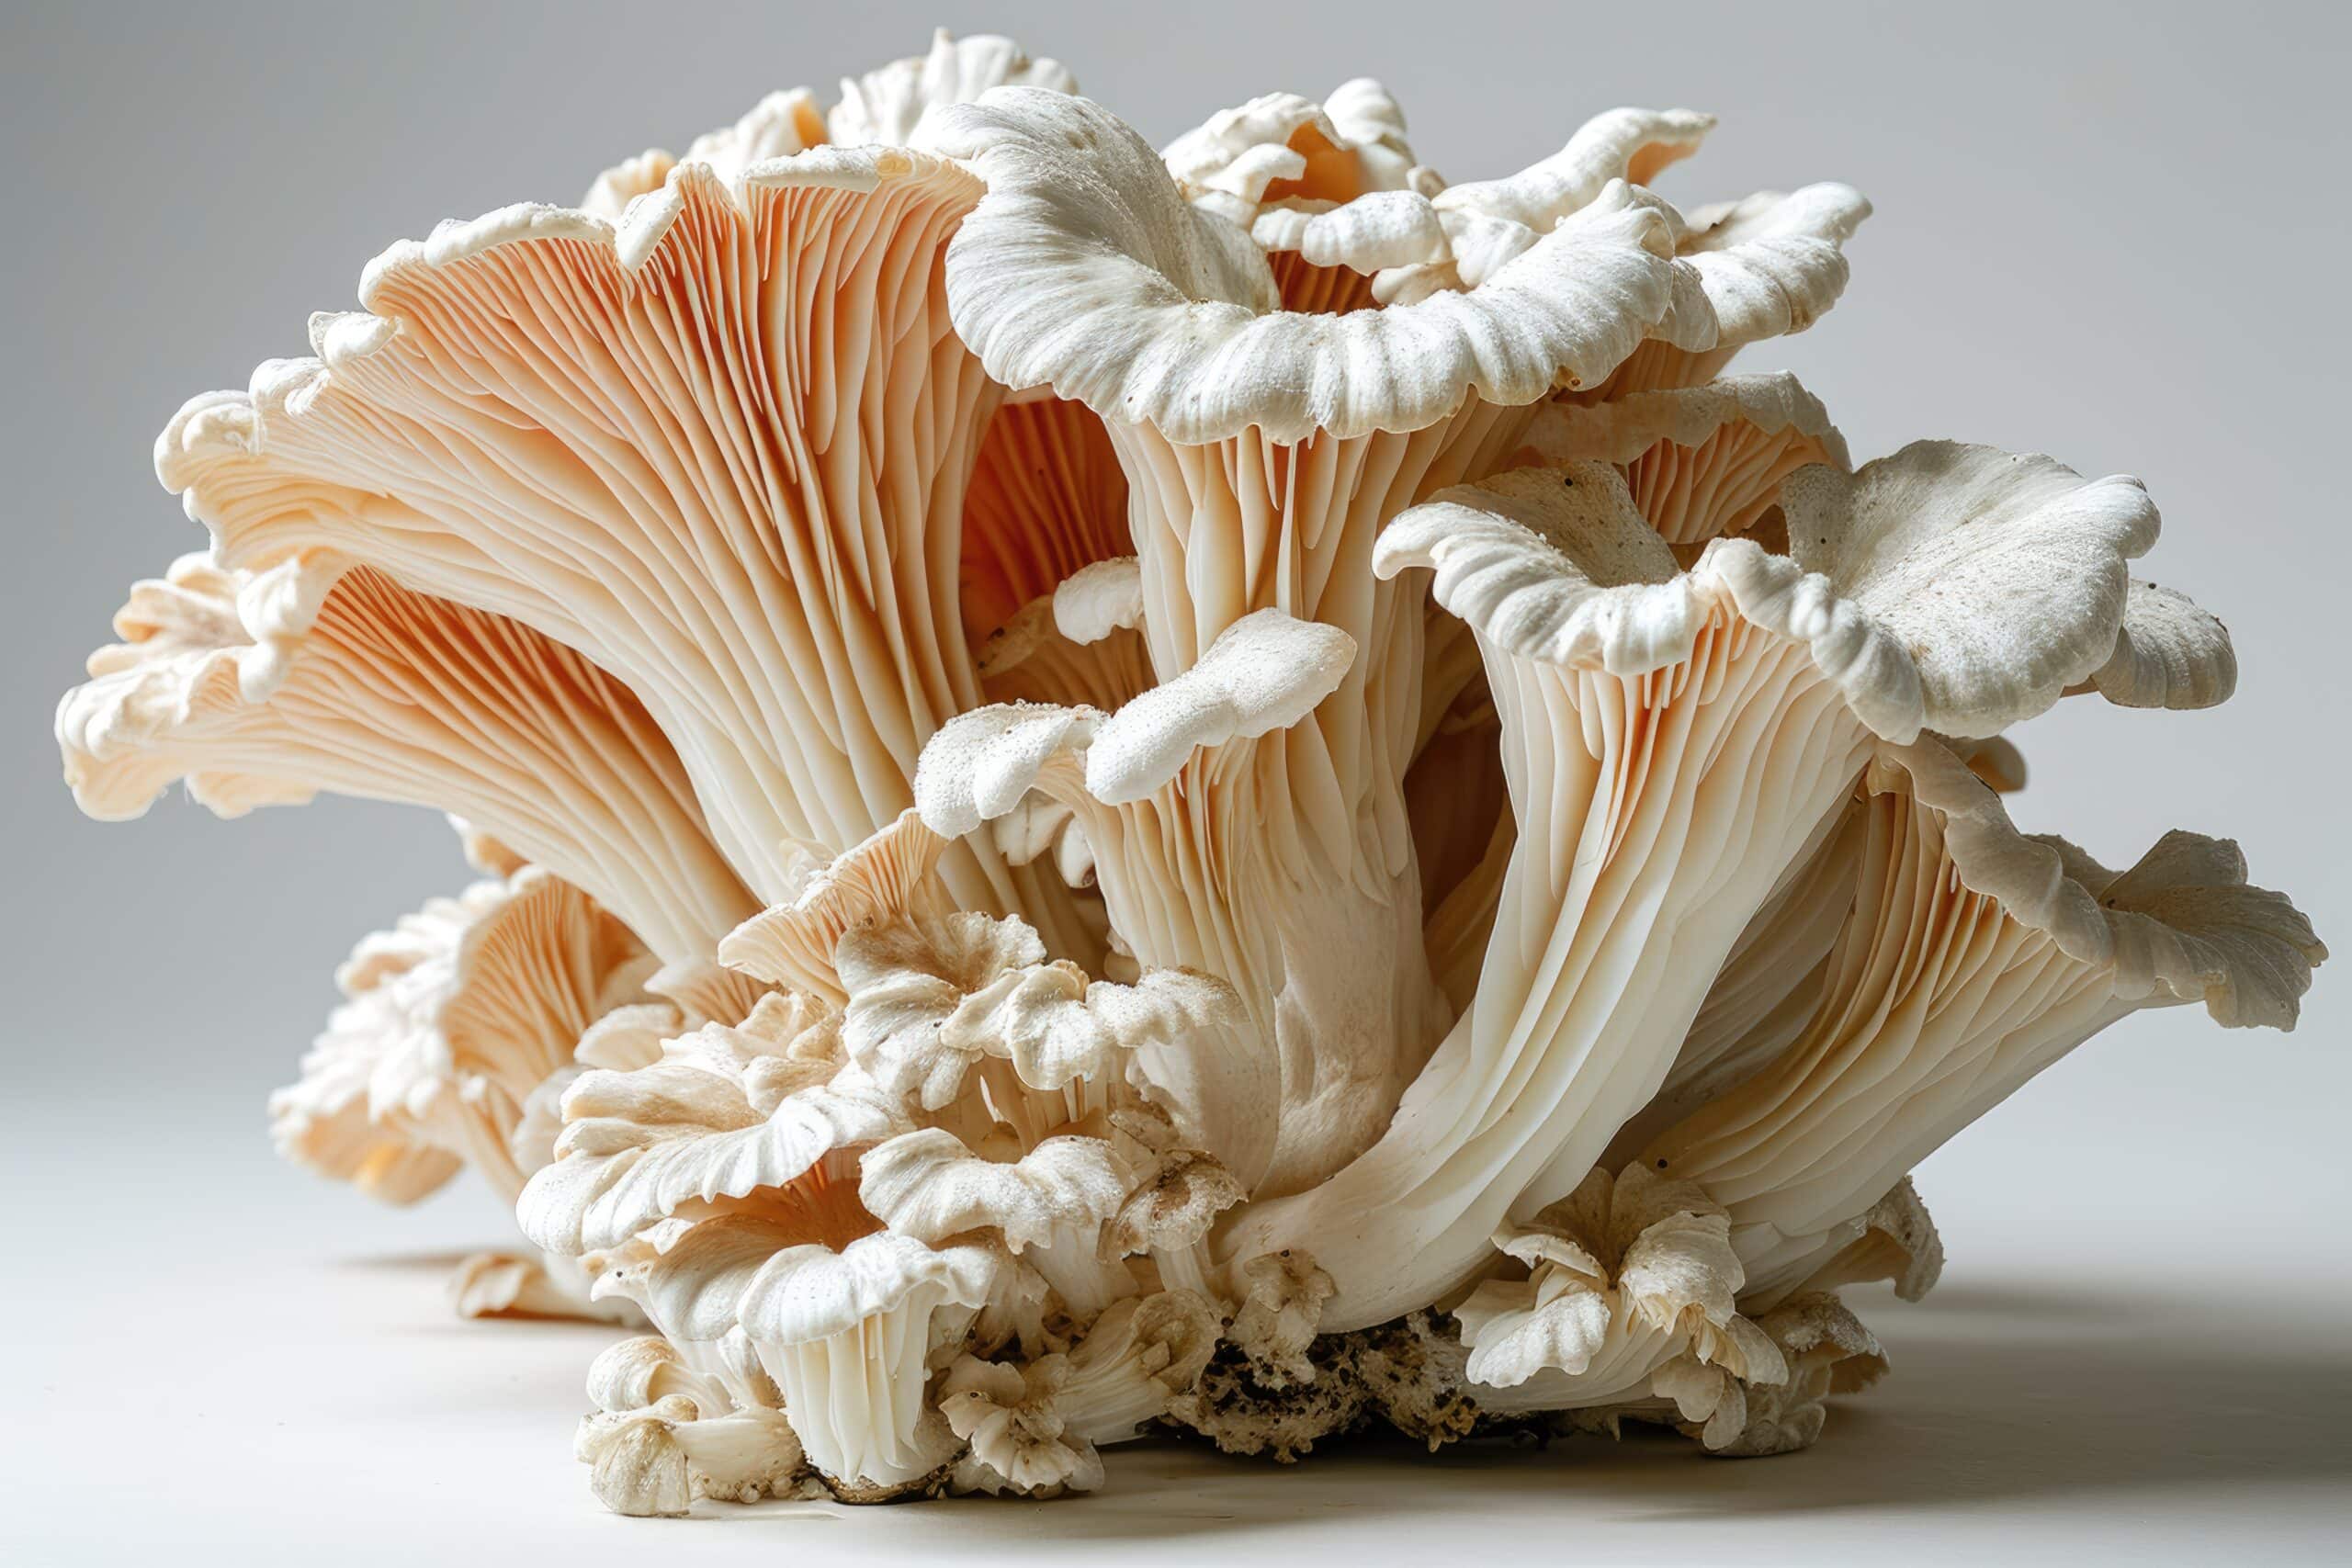 growmyownhealthfood.com : Are there any toxic look-alikes to chicken of the woods?